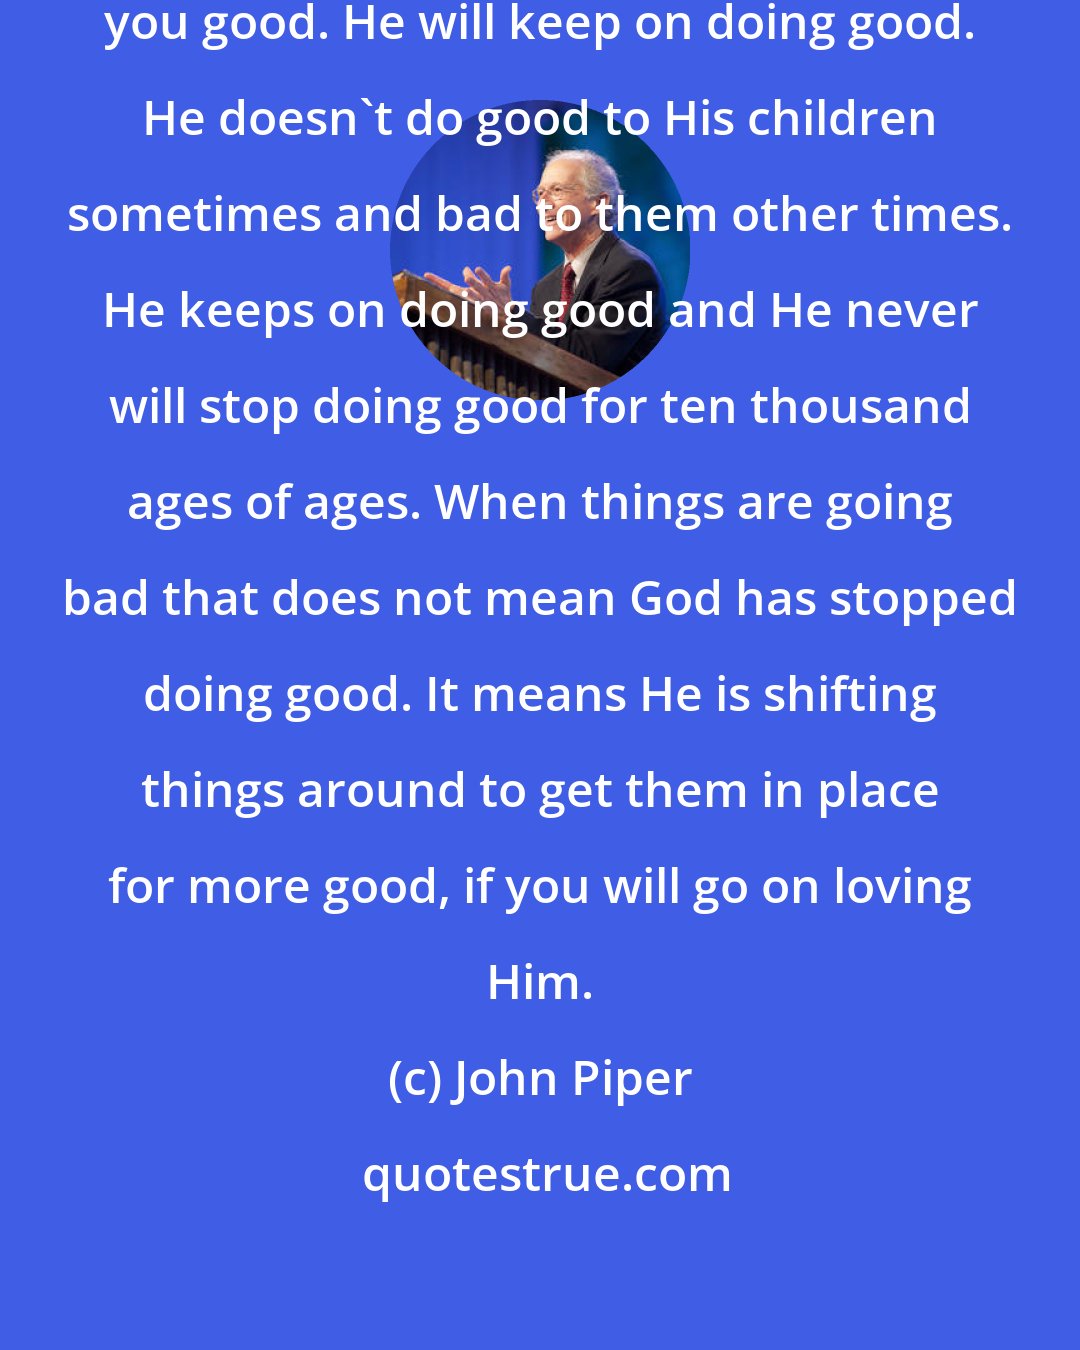 John Piper: God will not turn away from doing you good. He will keep on doing good. He doesn't do good to His children sometimes and bad to them other times. He keeps on doing good and He never will stop doing good for ten thousand ages of ages. When things are going bad that does not mean God has stopped doing good. It means He is shifting things around to get them in place for more good, if you will go on loving Him.